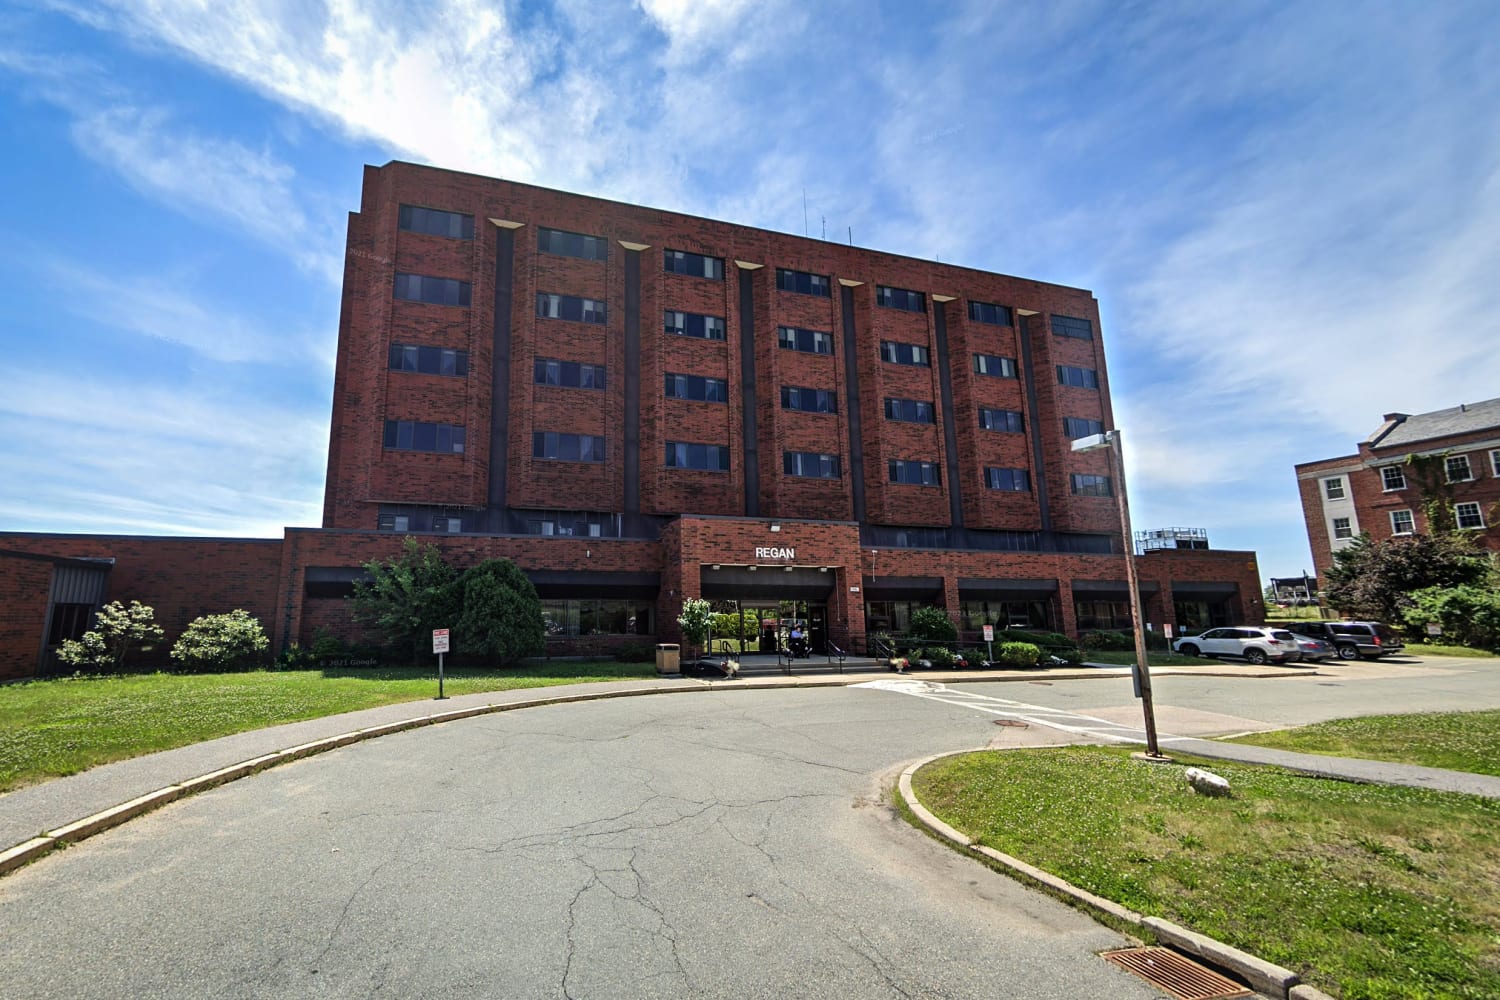 Outbreak reported at Rhode Island hospital after Covid-positive, asymptomatic staff asked to work